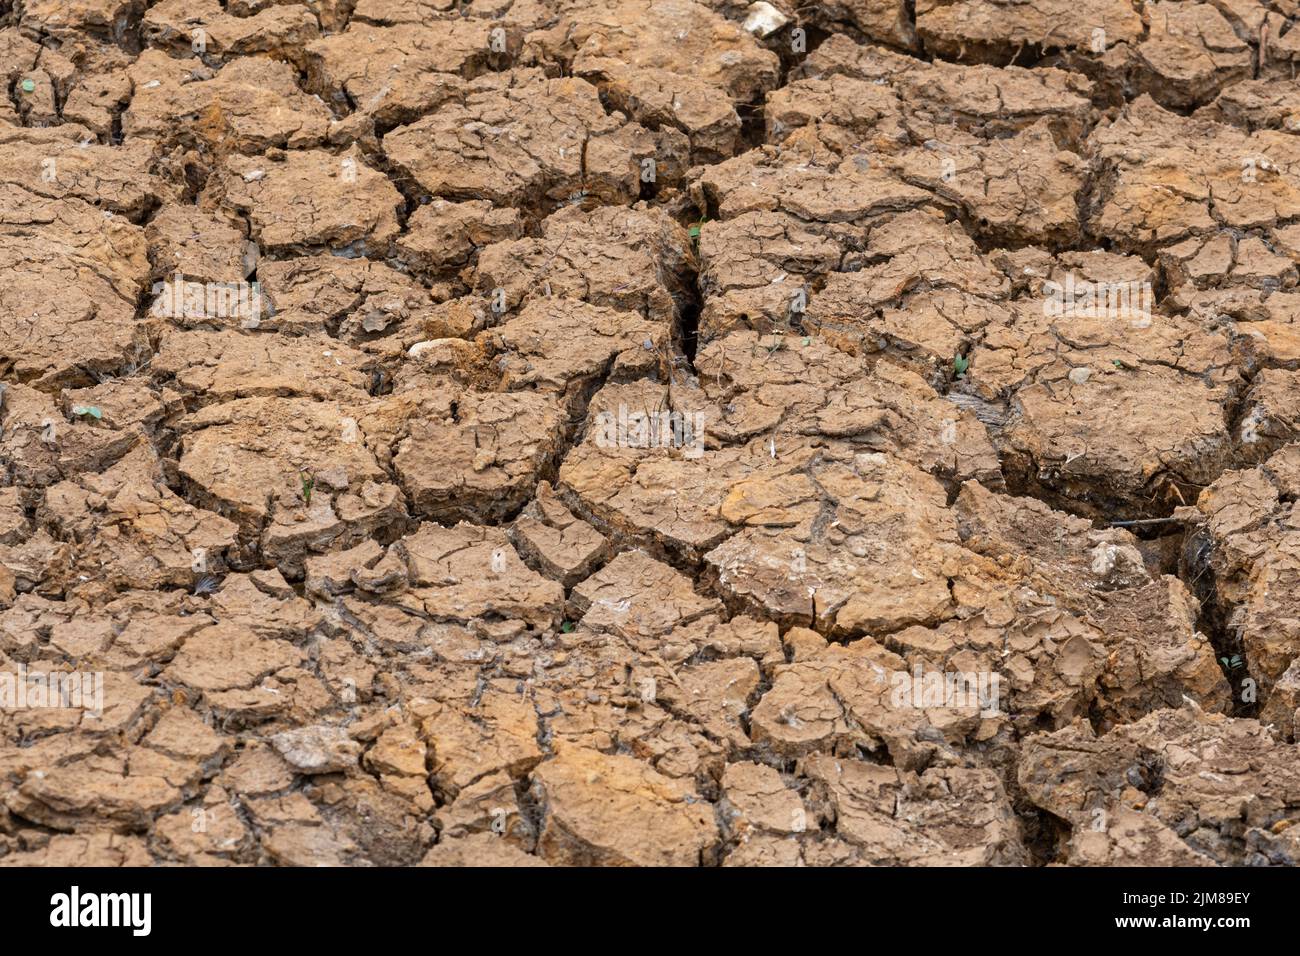 Dried up pond, cracked earth, during the drought of summer 2022, Hampshire, England, UK Stock Photo